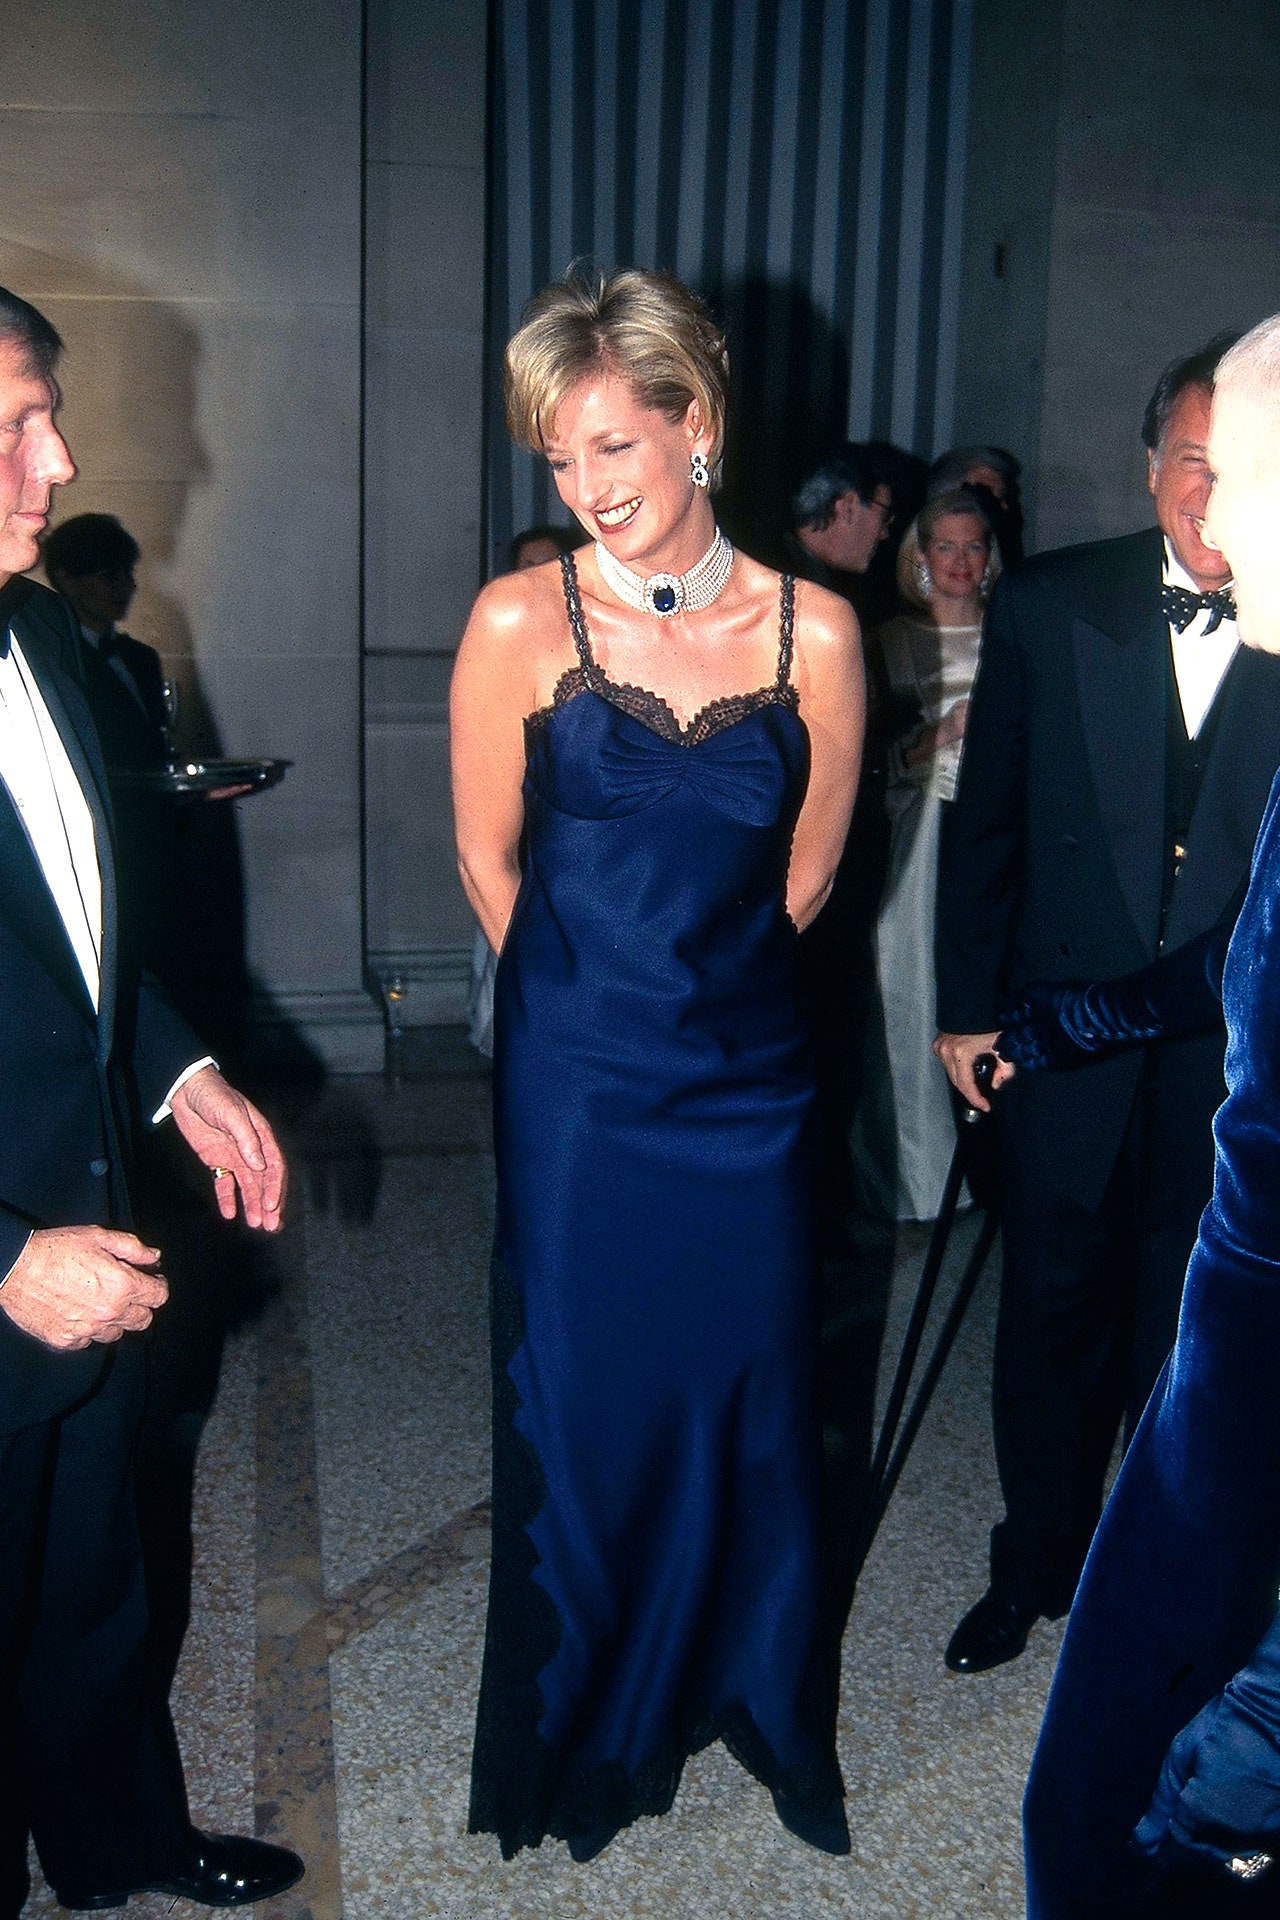 Image may contain Diana Princess of Wales Person Formal Wear Clothing Dress Suit Accessories Tie Fashion and Adult